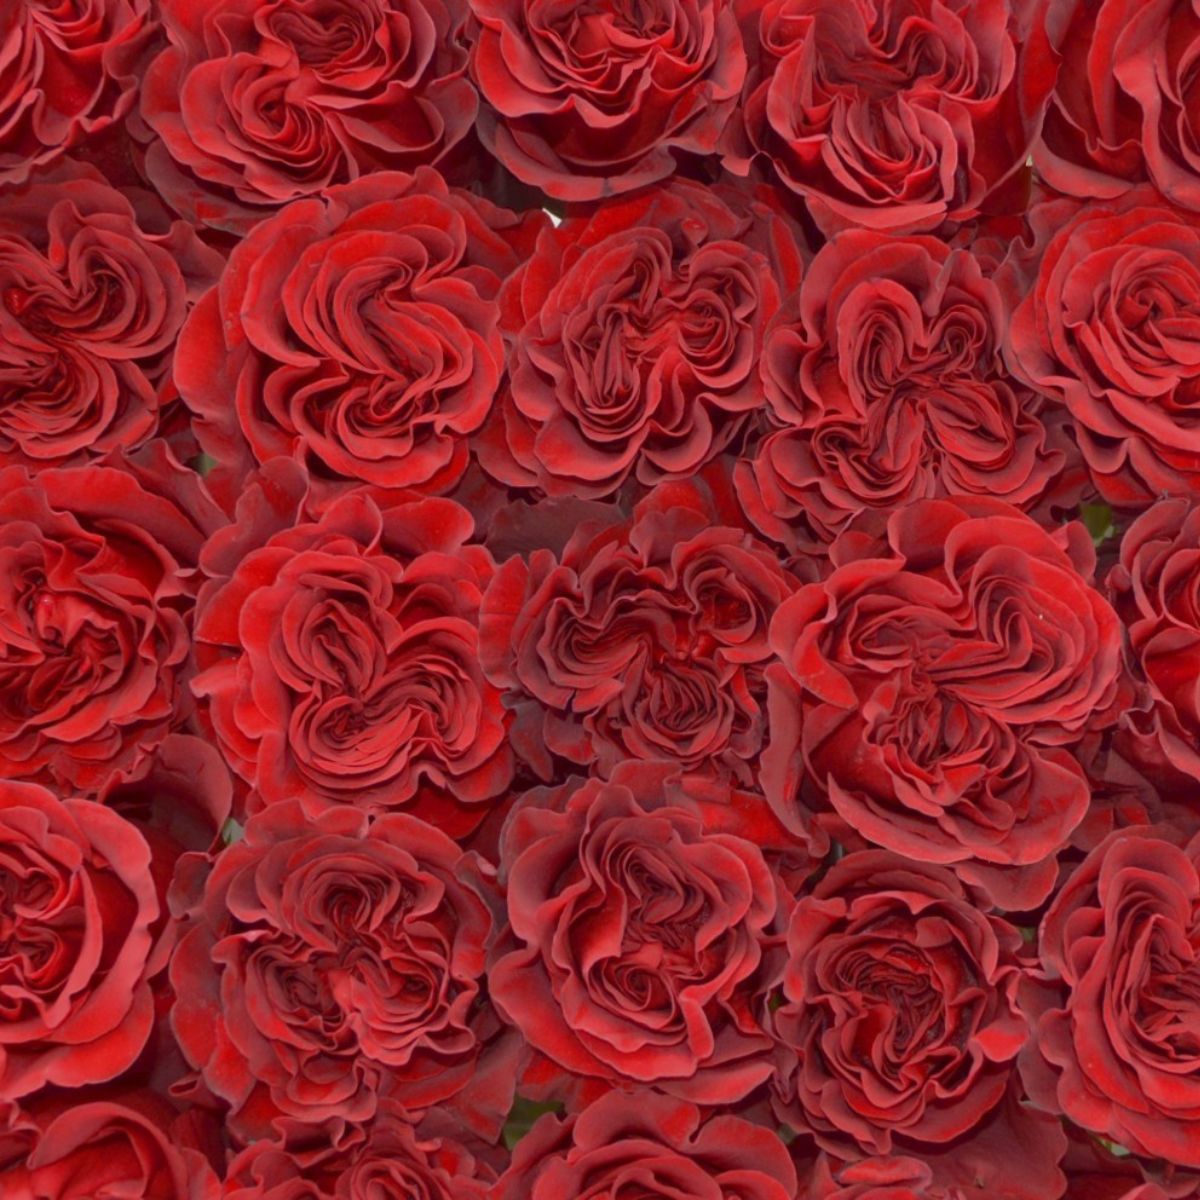 A full view of Rose Hearts